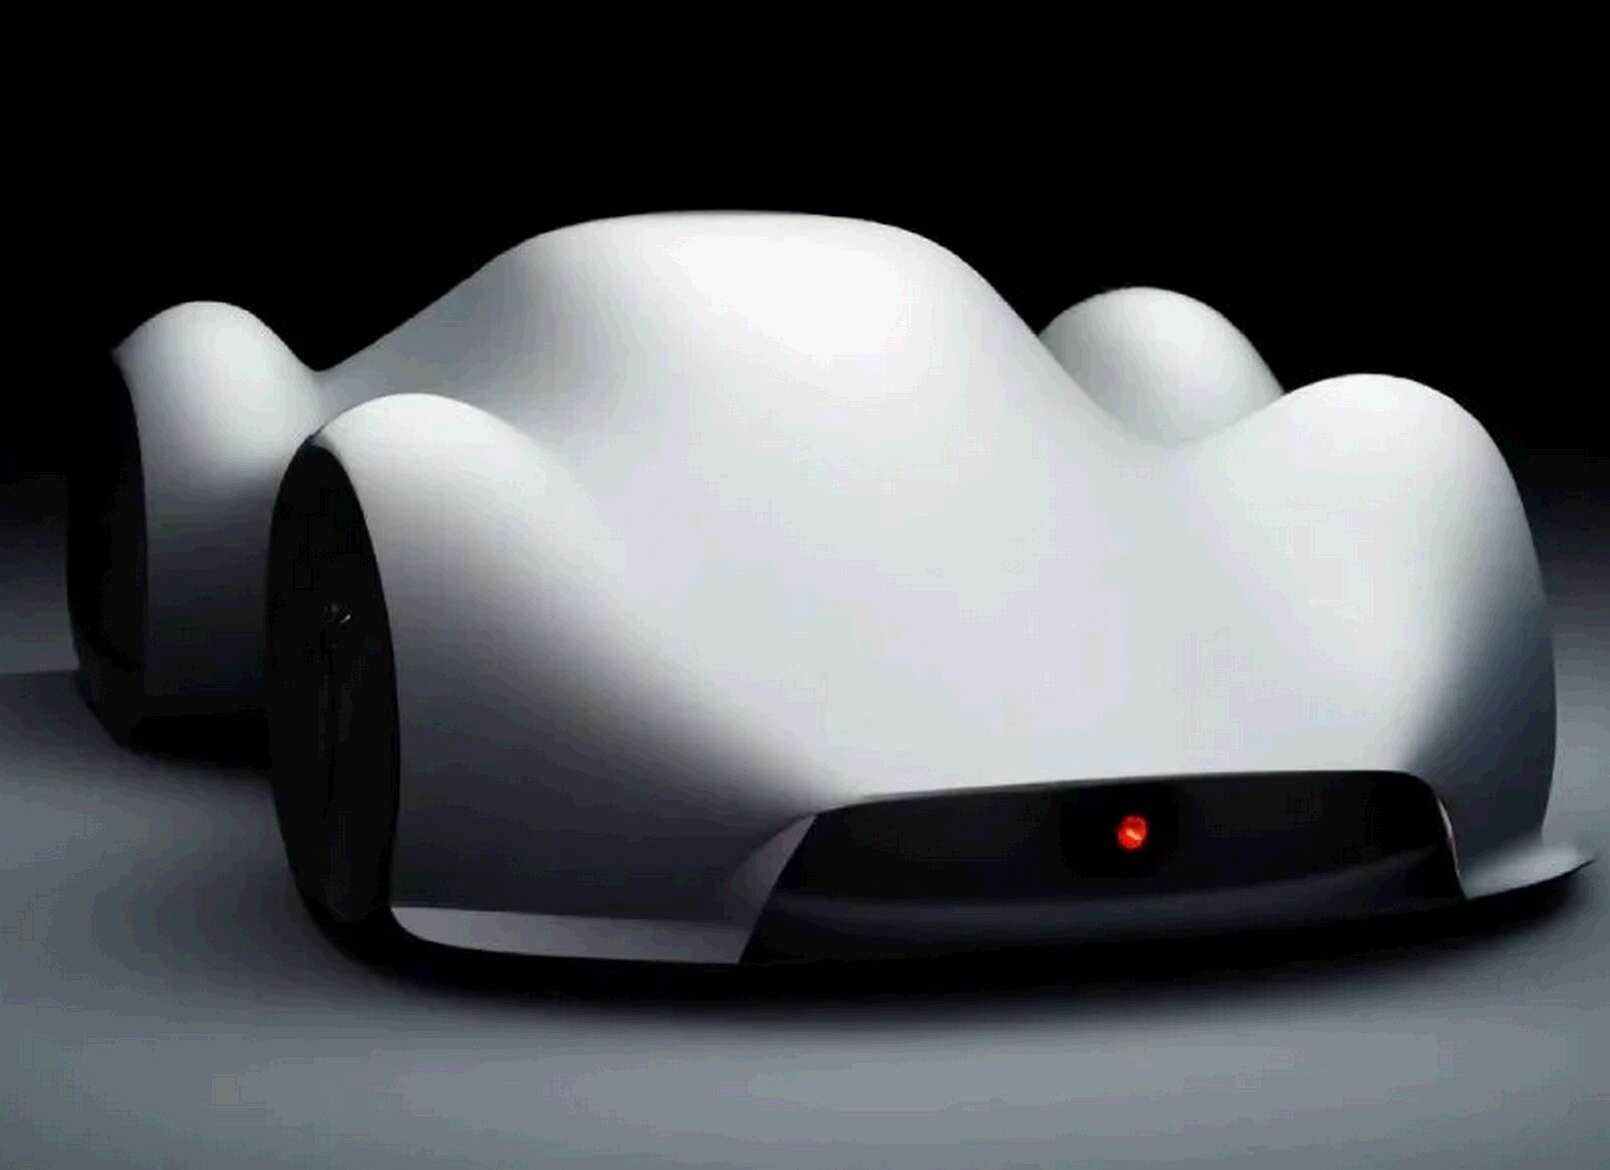 This is what Apple Car looks like, according to AI